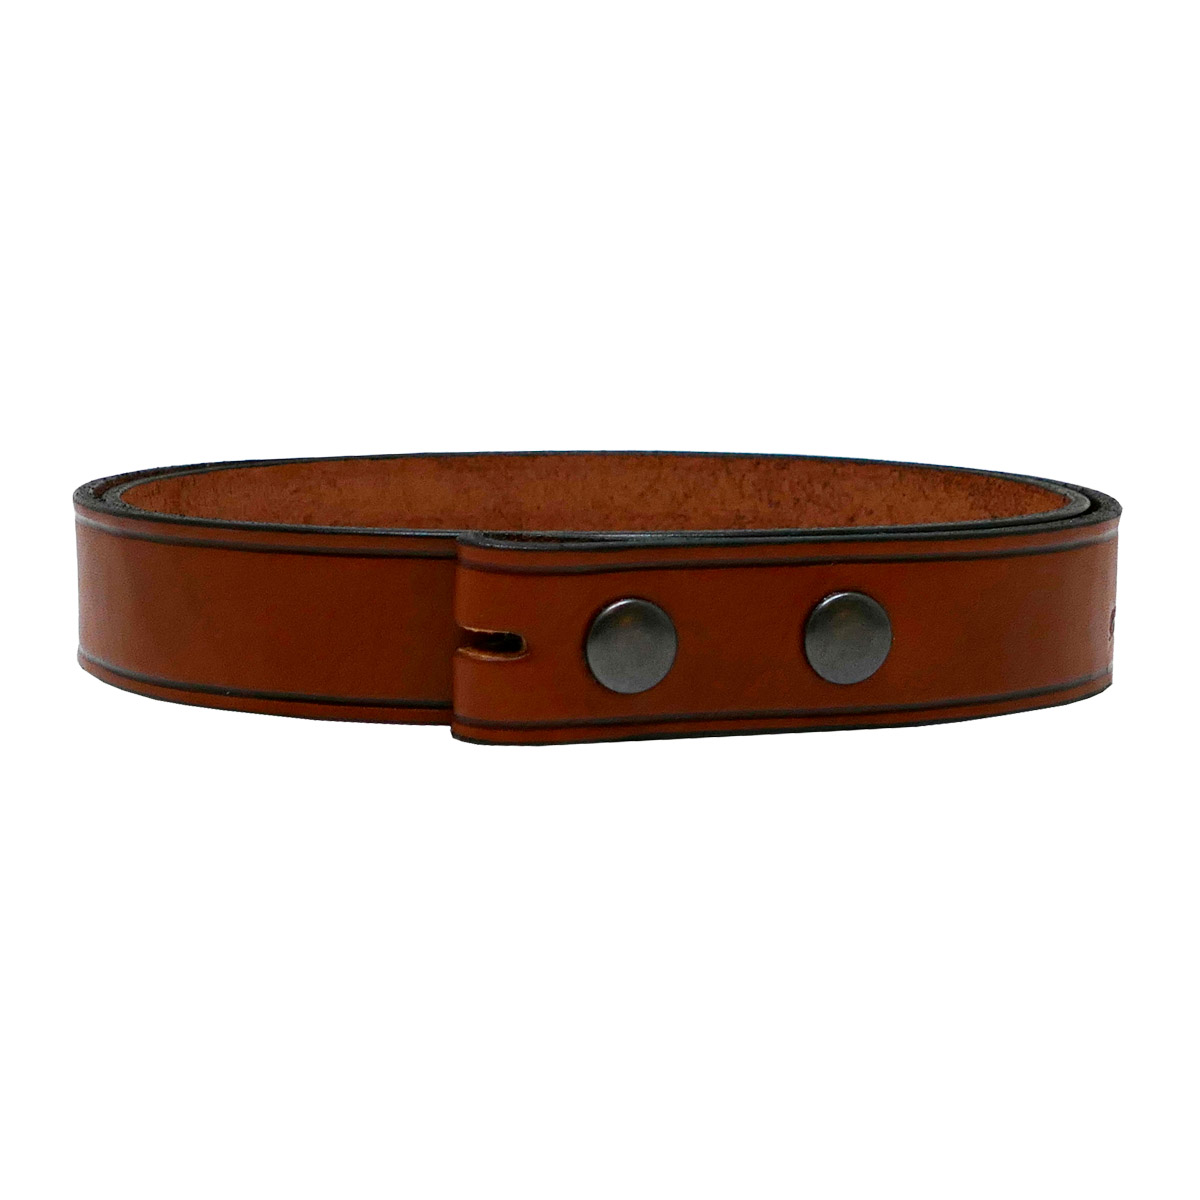 Strap for Trophy Buckle, Brown Leather, with Nickel Plated Press Studs 1